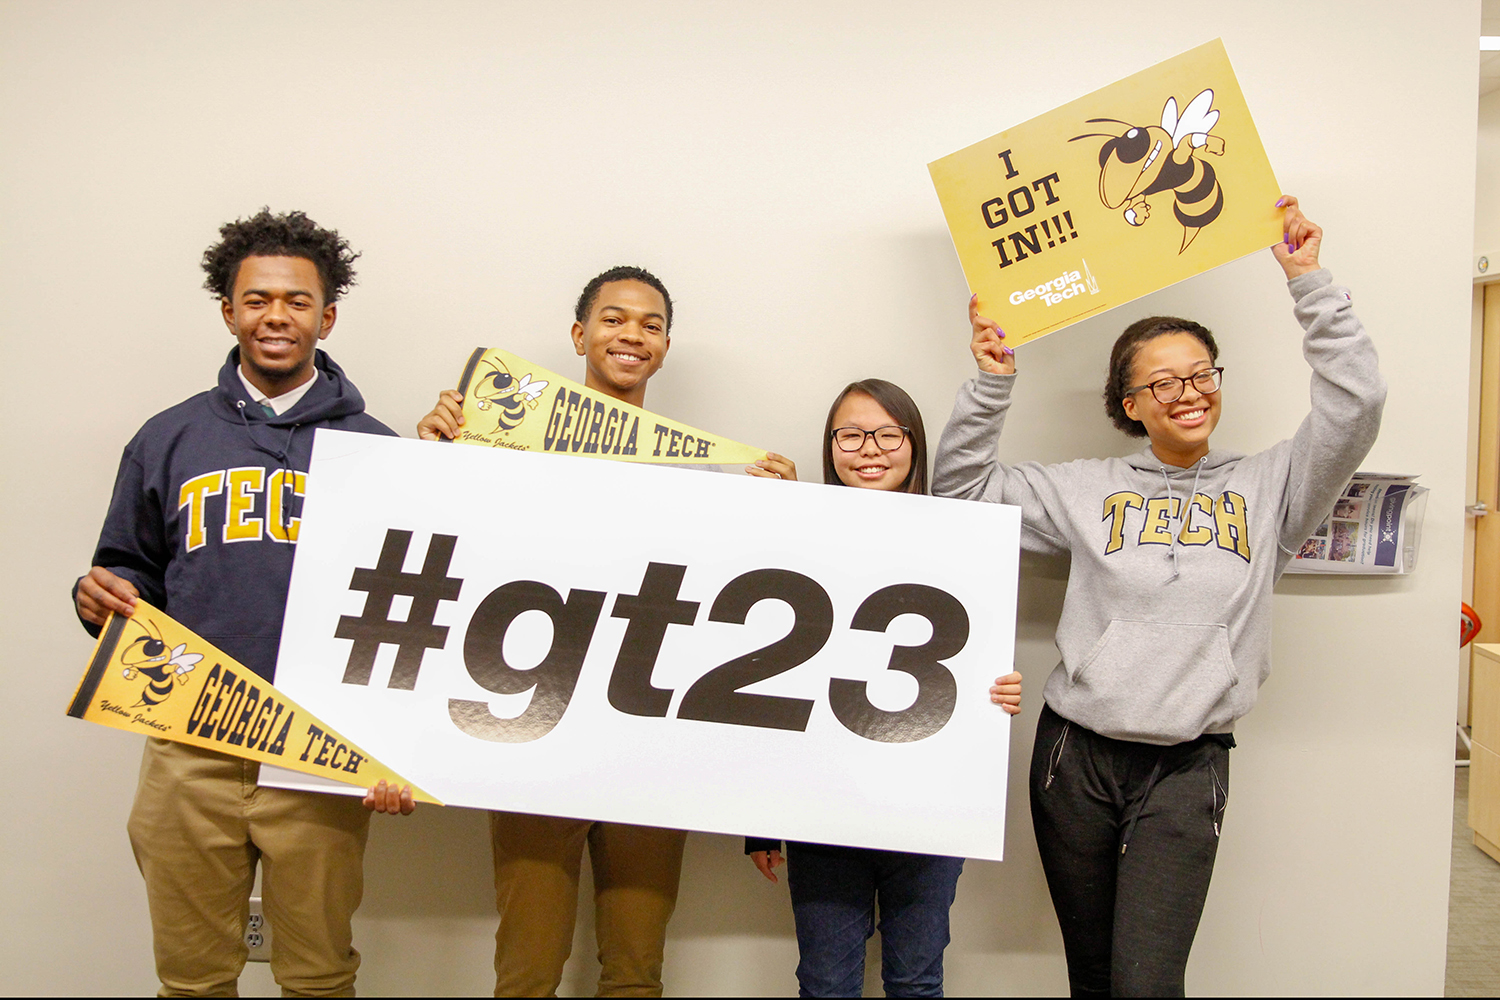 (L-R): Chris McCrary, DeGreer Harris, Ivy Diamond, and Niara Botchwey from Drew Charter School in Atlanta were all accepted to Georgia Tech during Early Action.